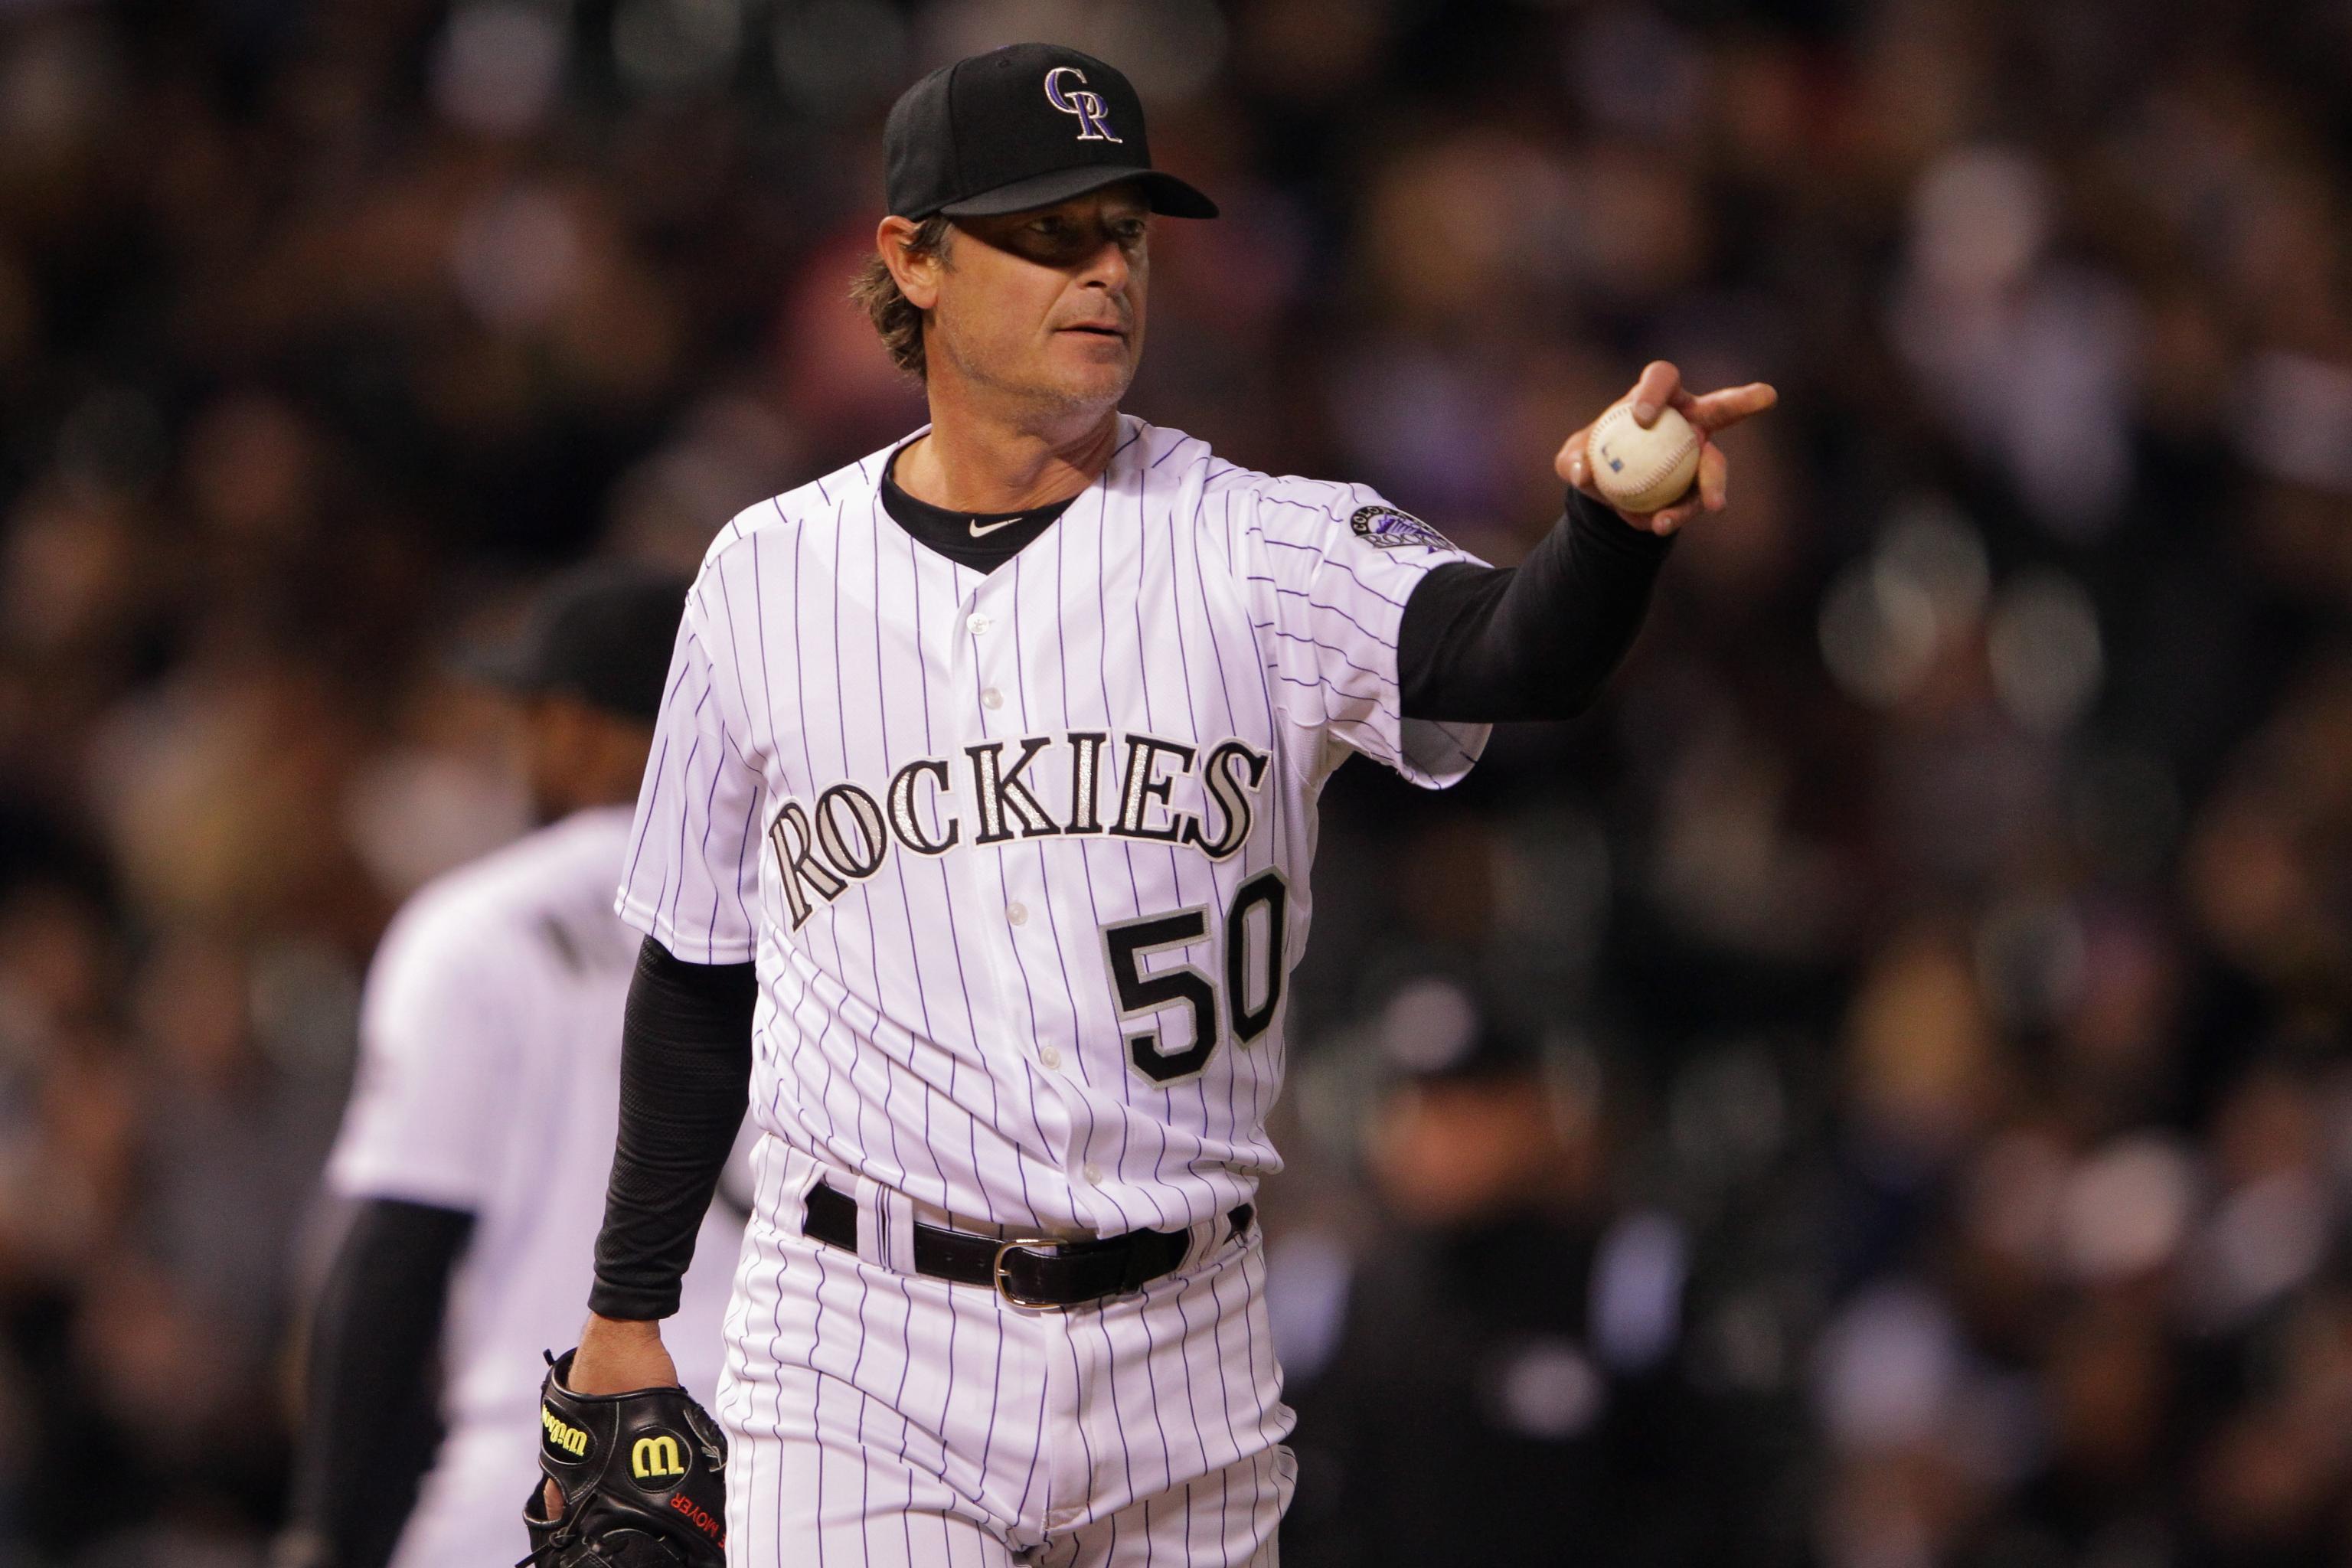 Rockies' Jamie Moyer relies on changeup to foil batters – The Denver Post